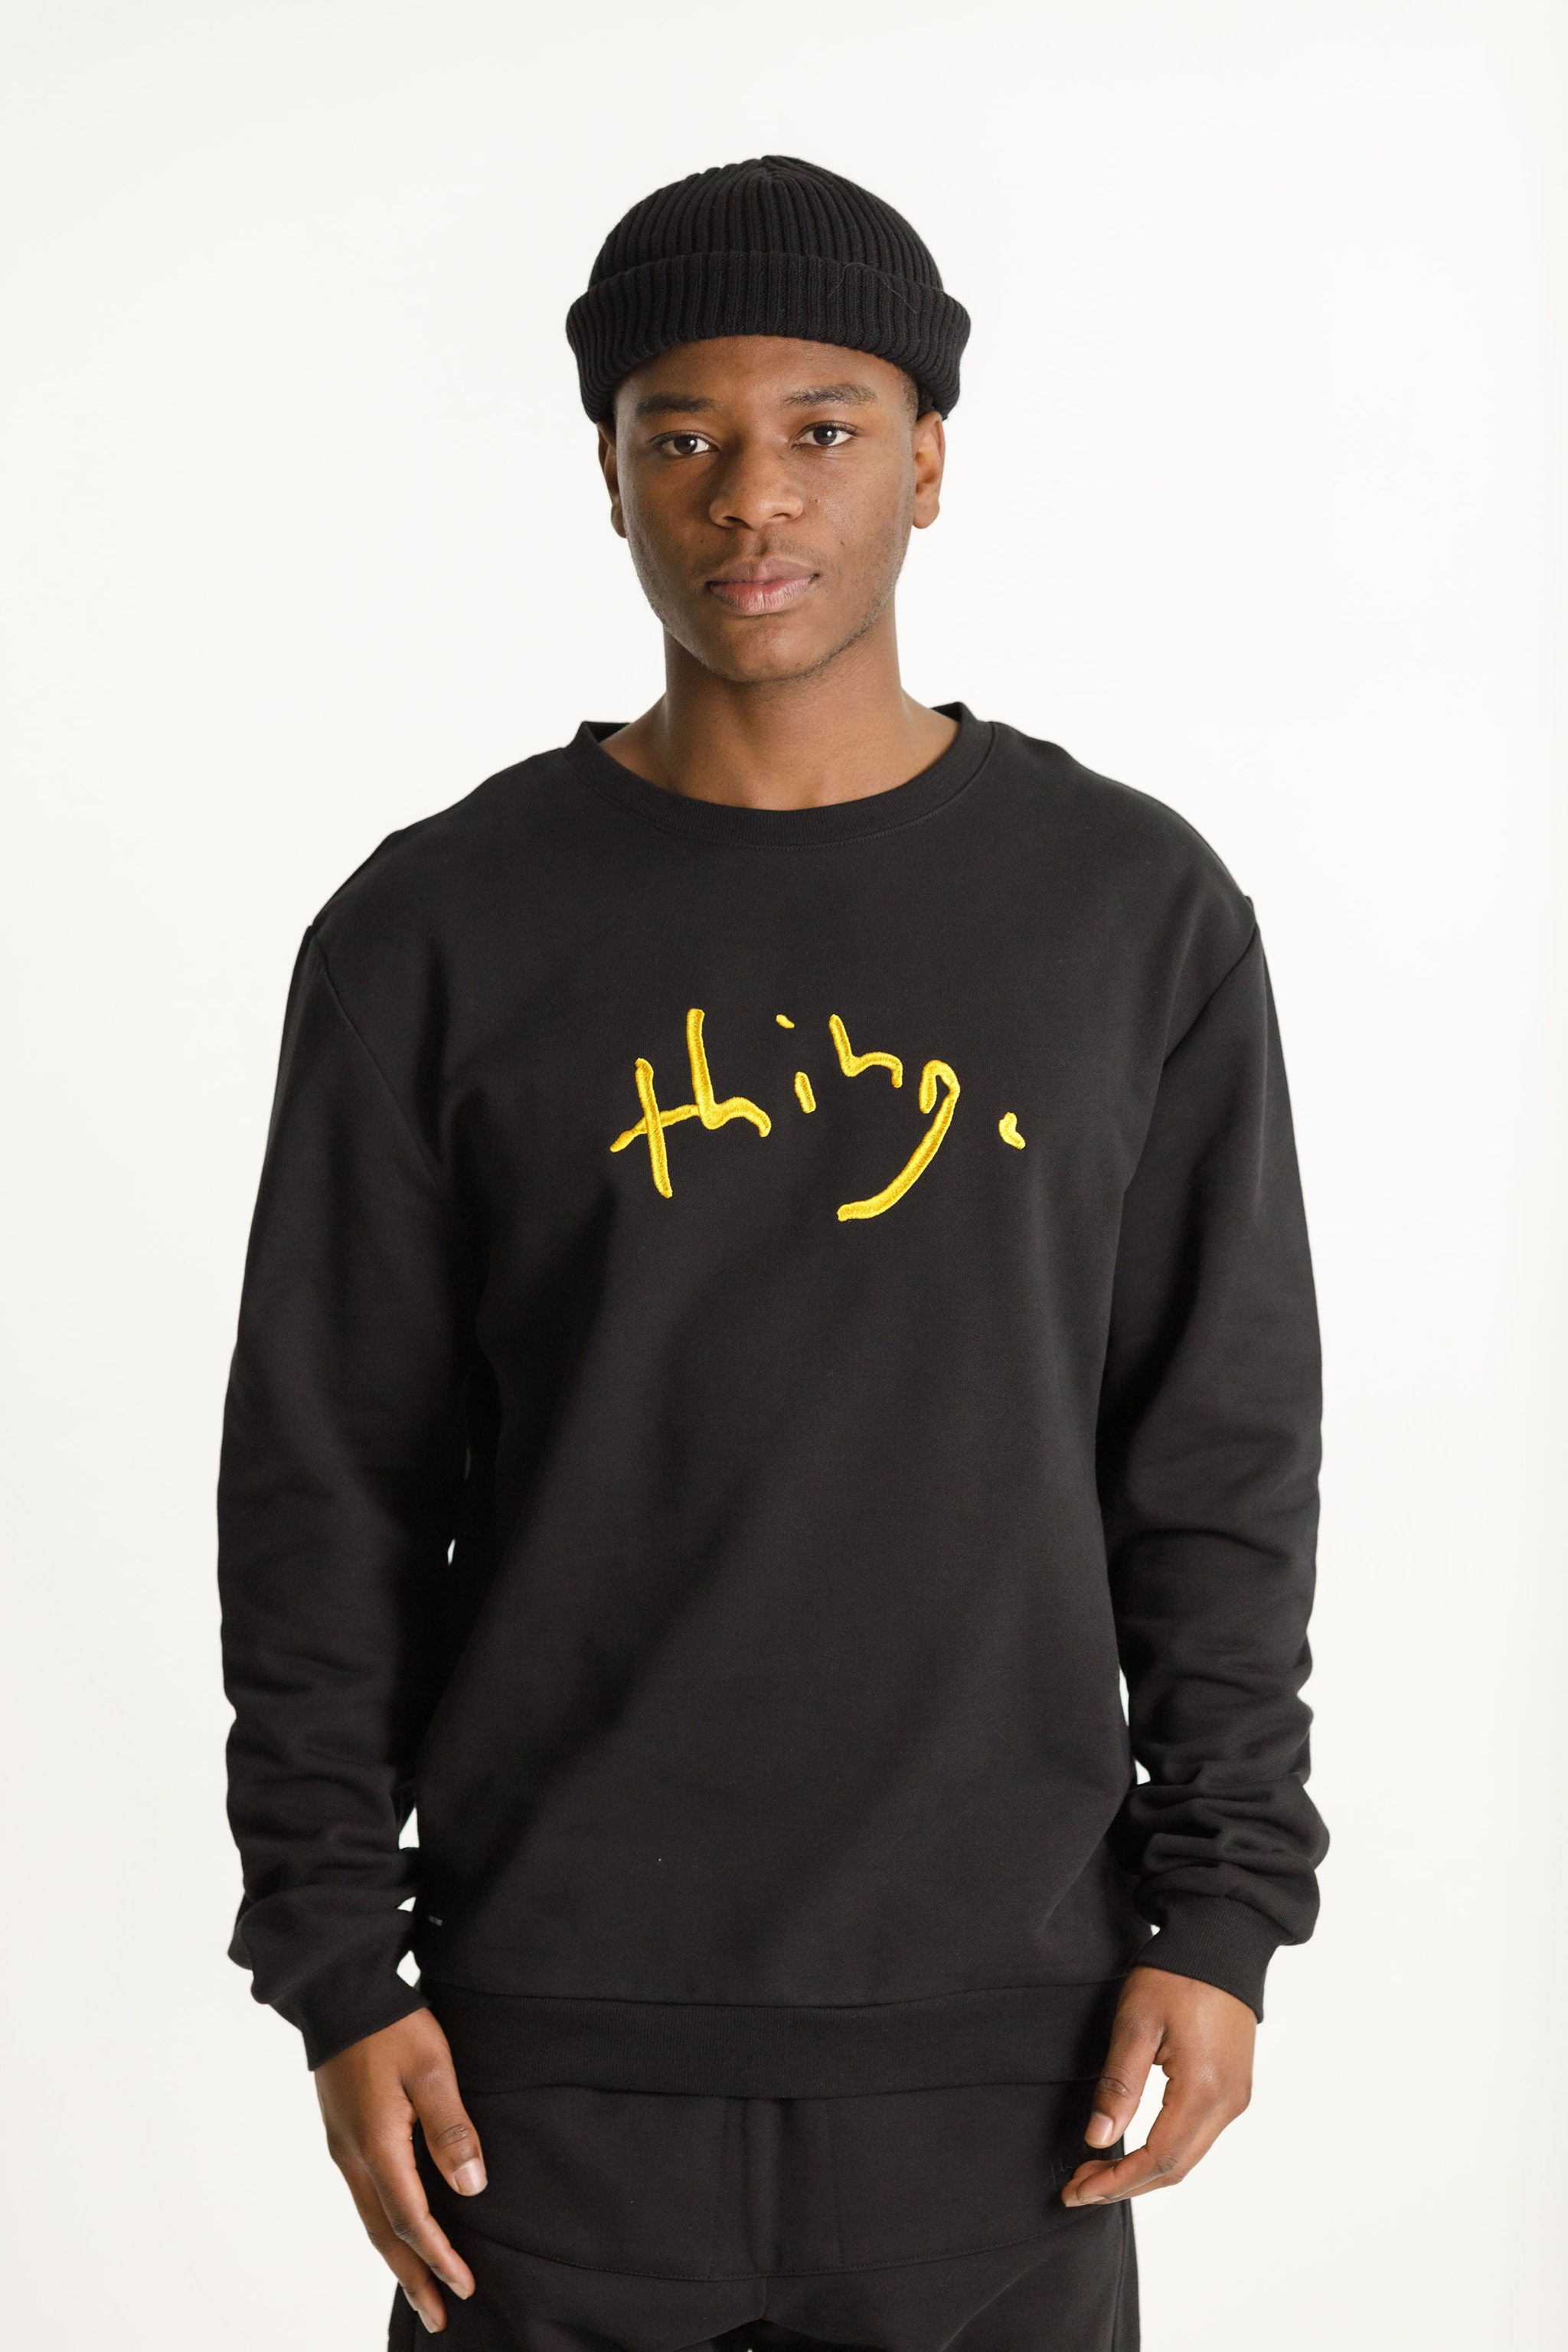 Title Crew - Sale - Black with Gold Thing Embroidery